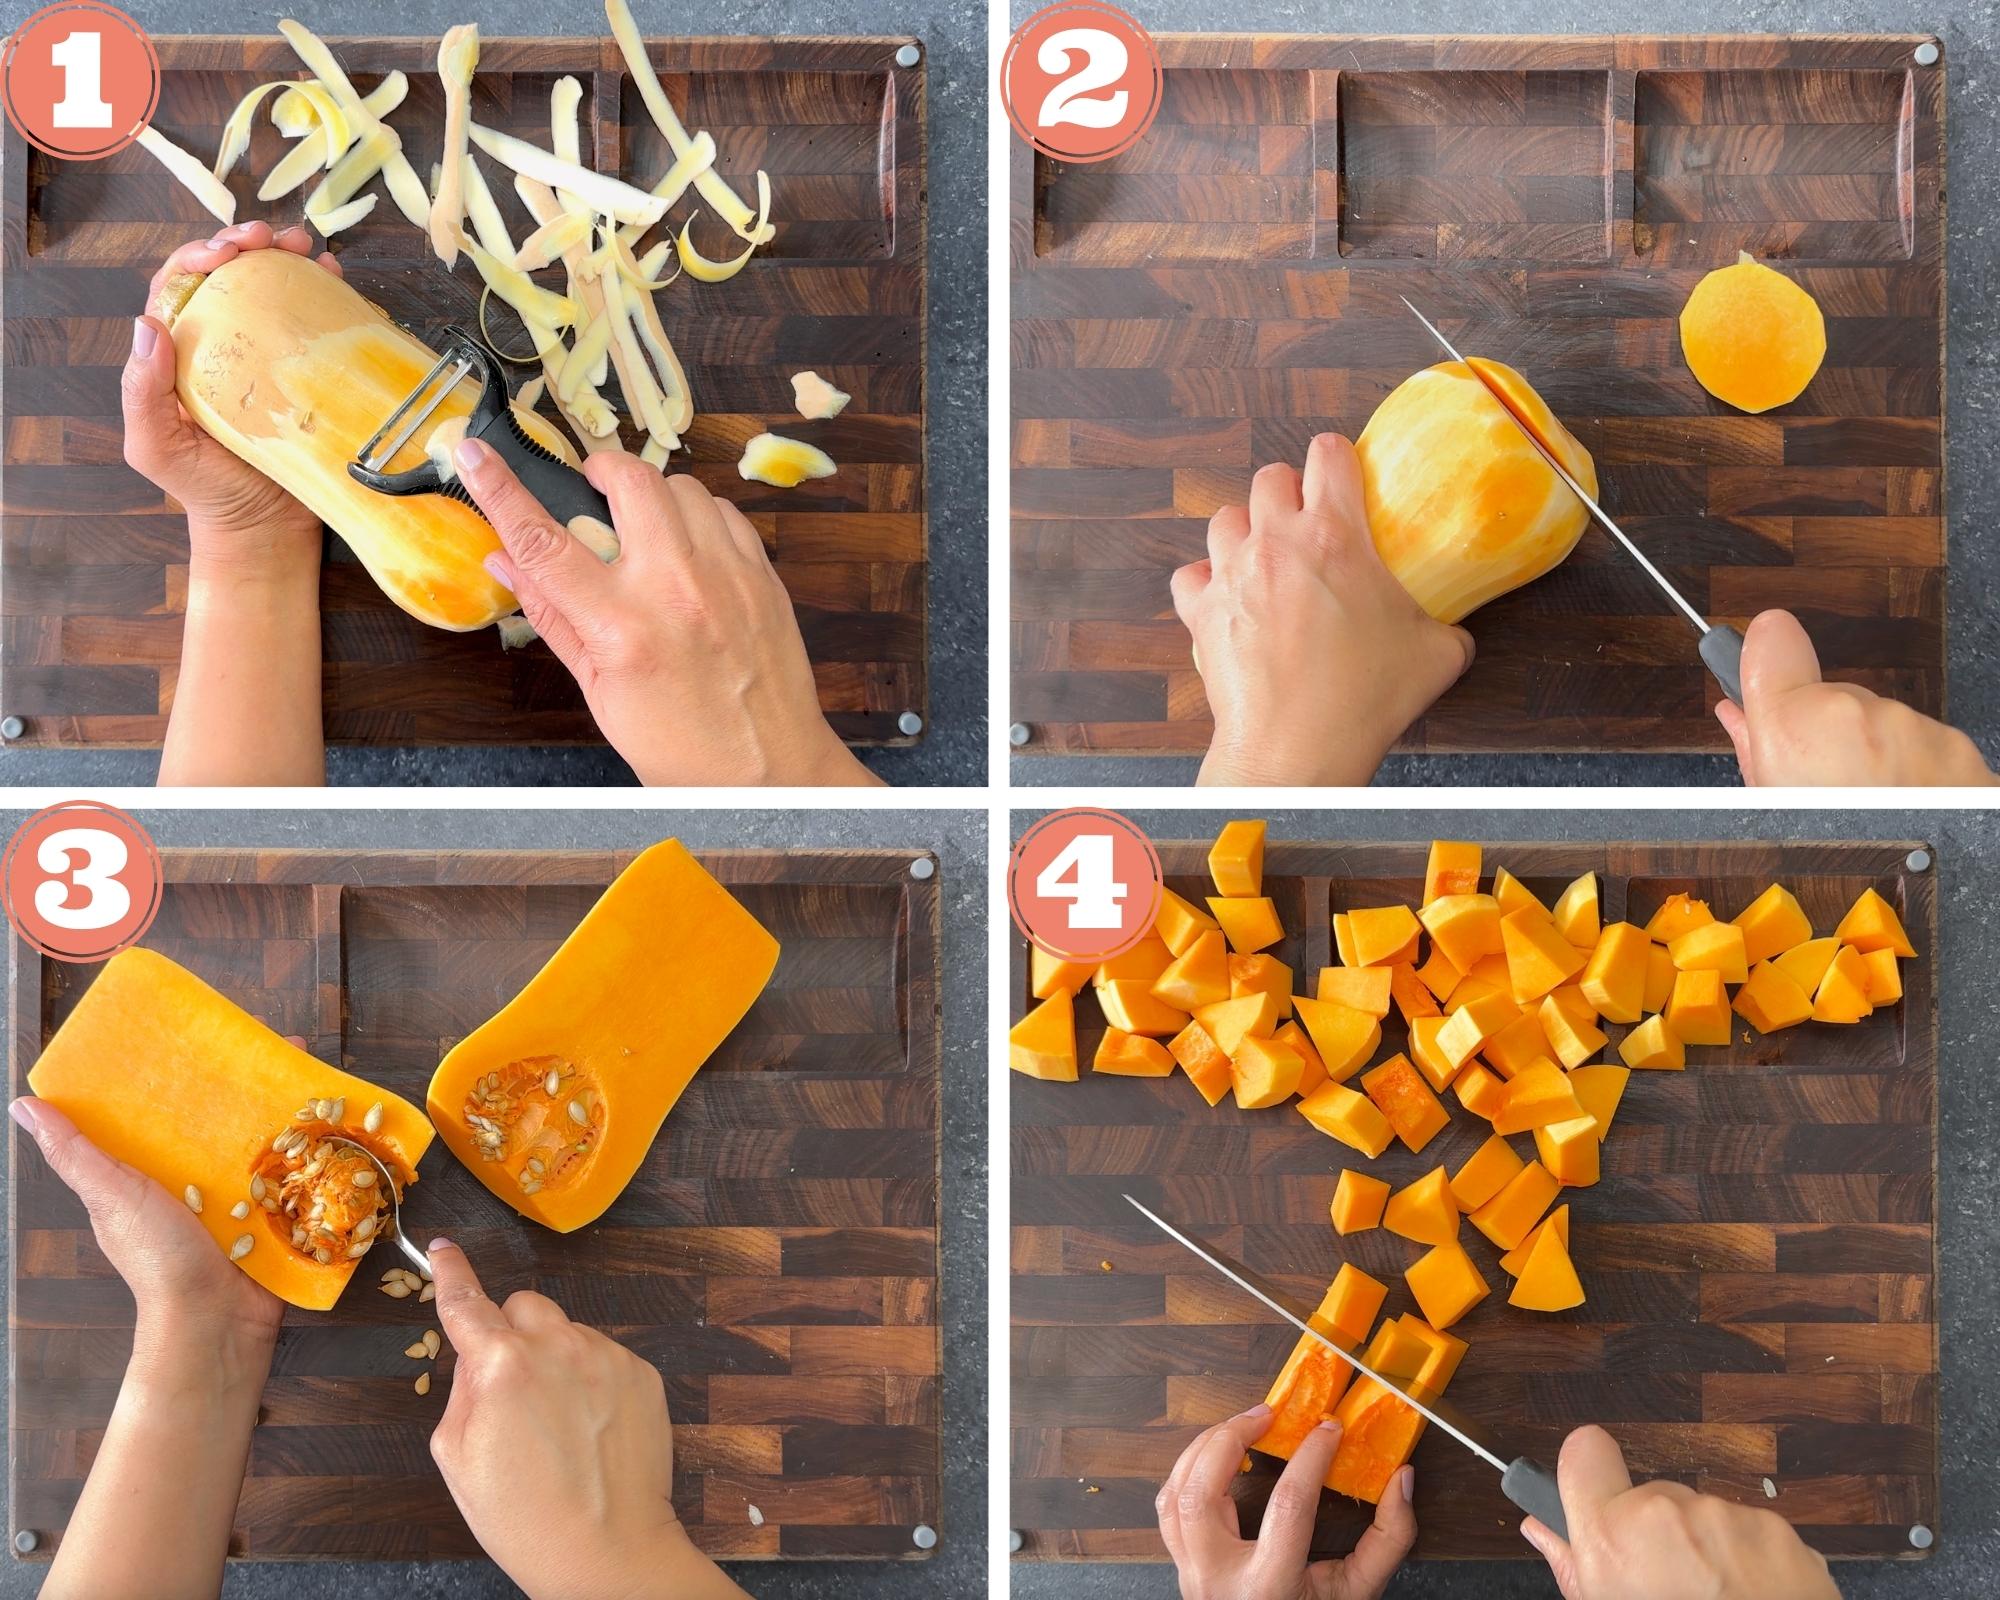 4-image grid showing how to peel and chop butternut squash